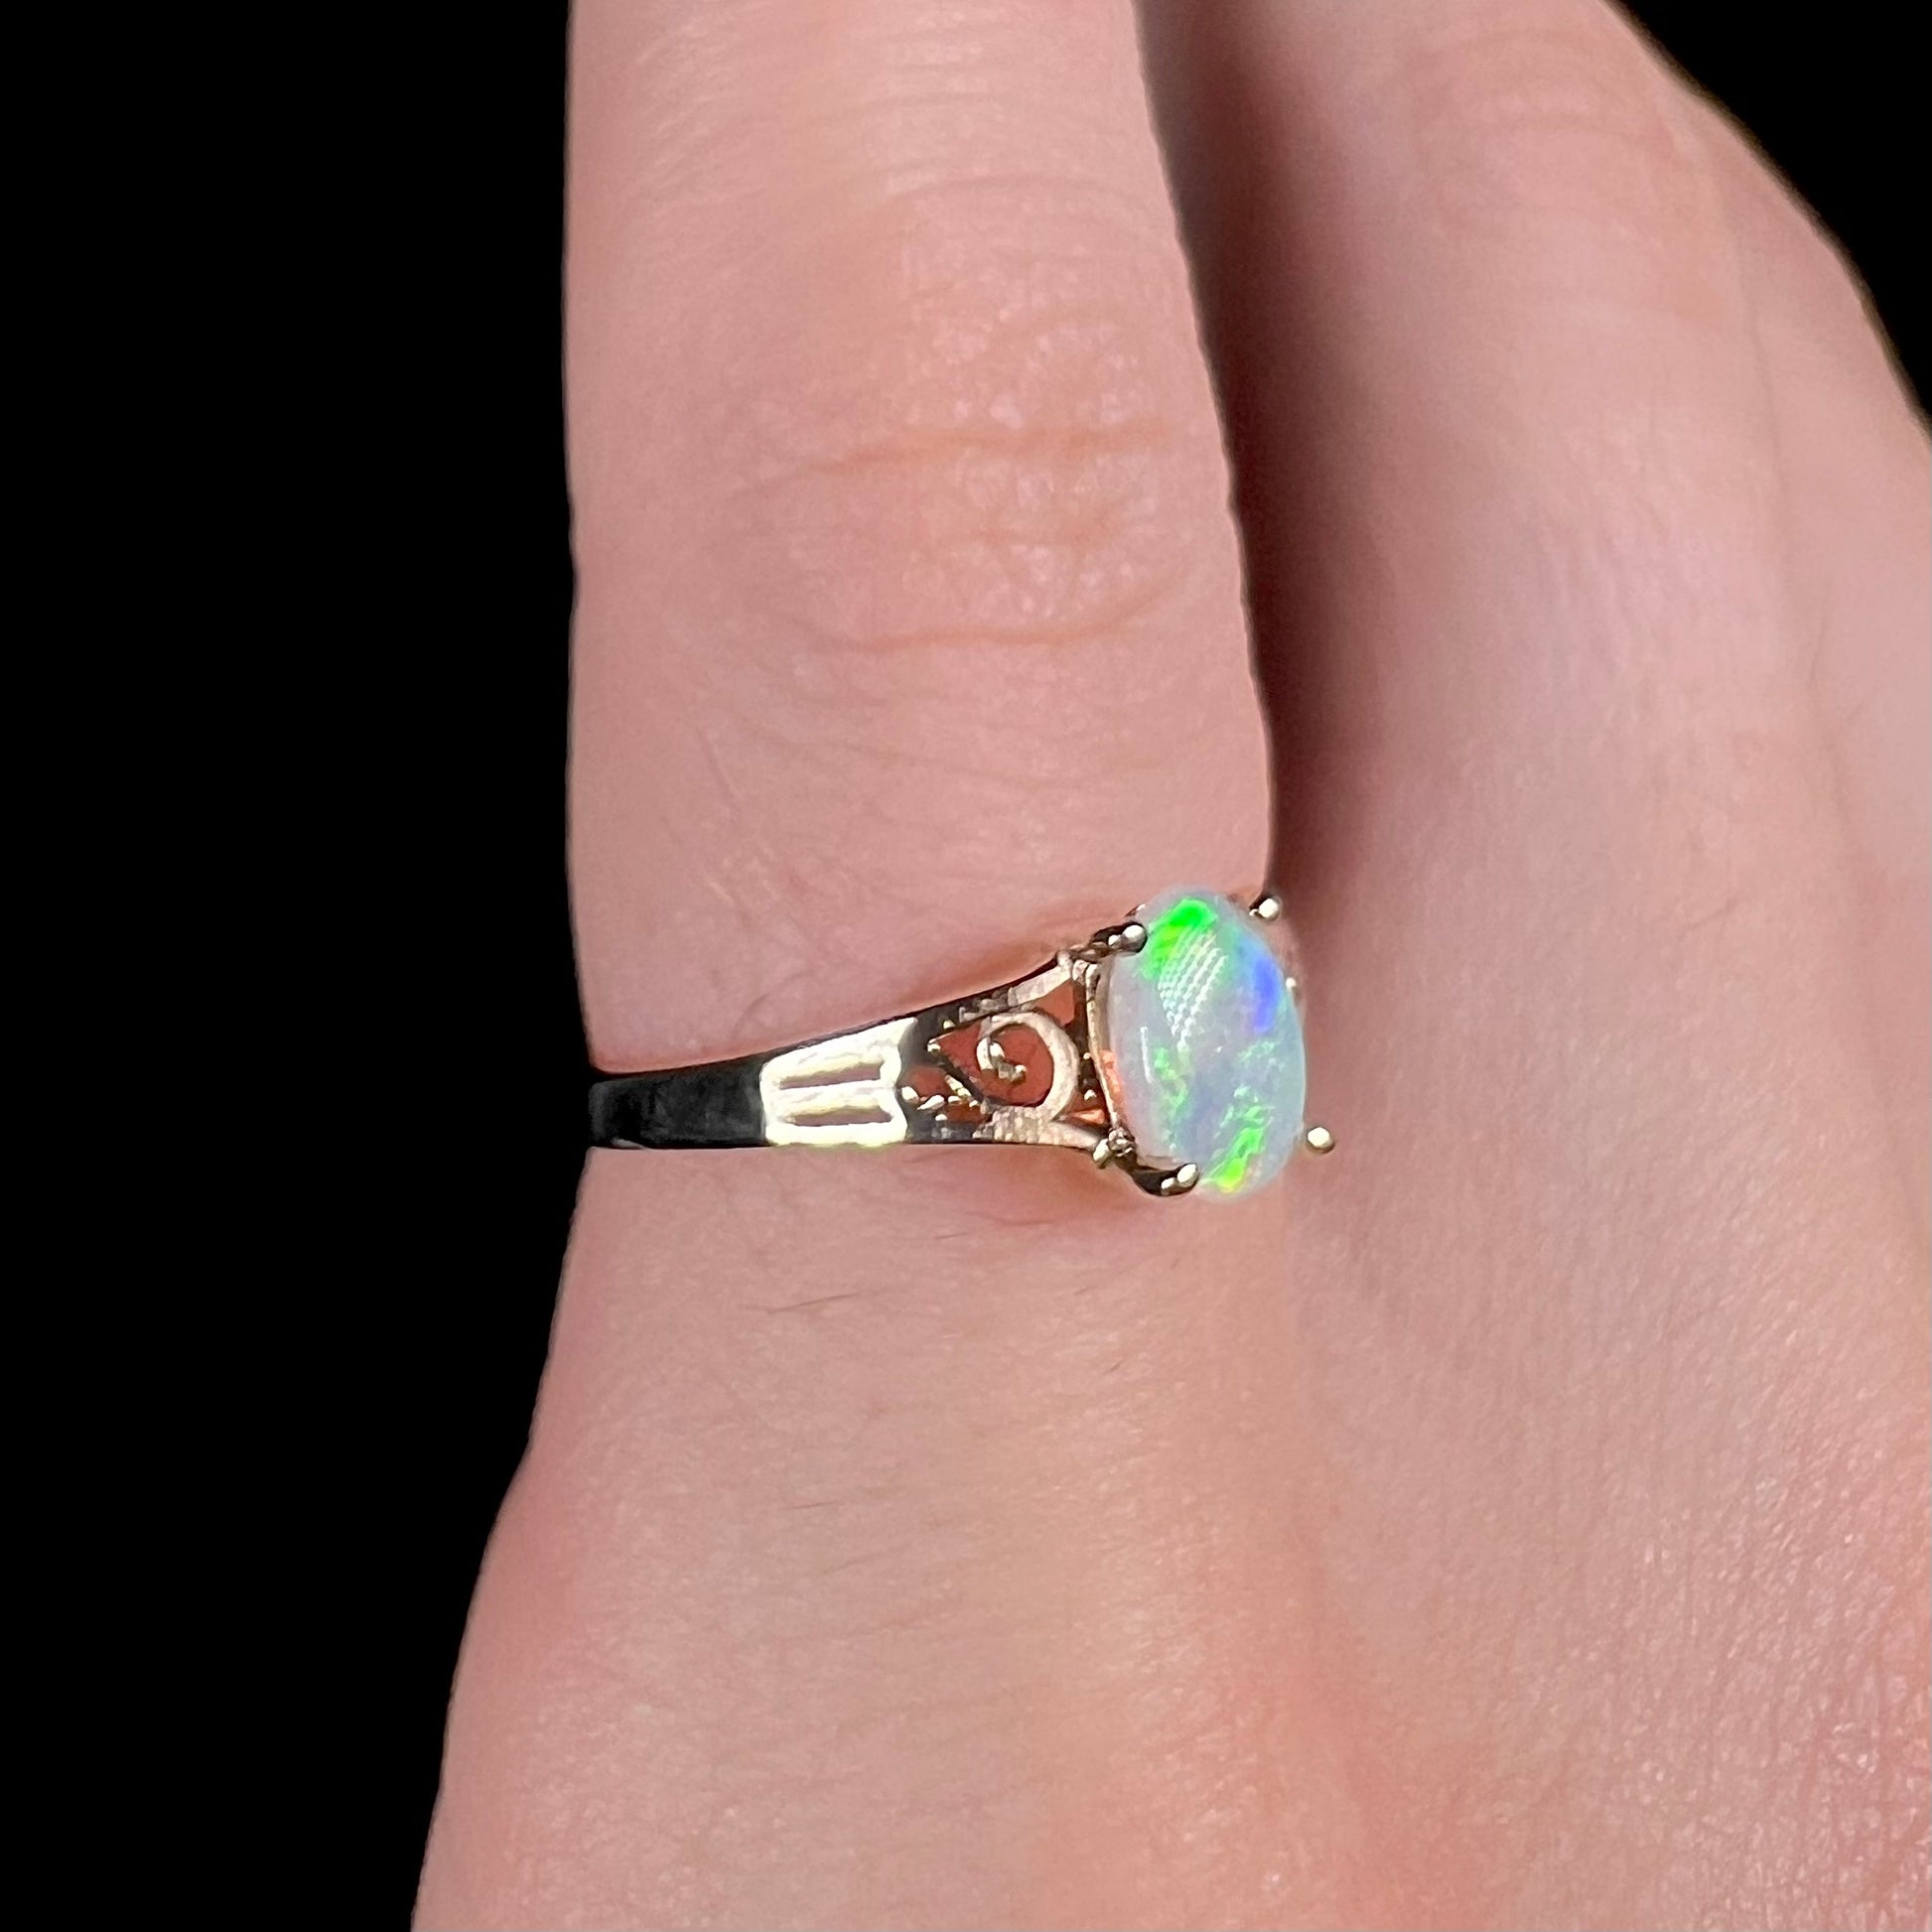 Ladies' 10 karat yellow gold opal solitaire ring.  The ring has filigree accents.